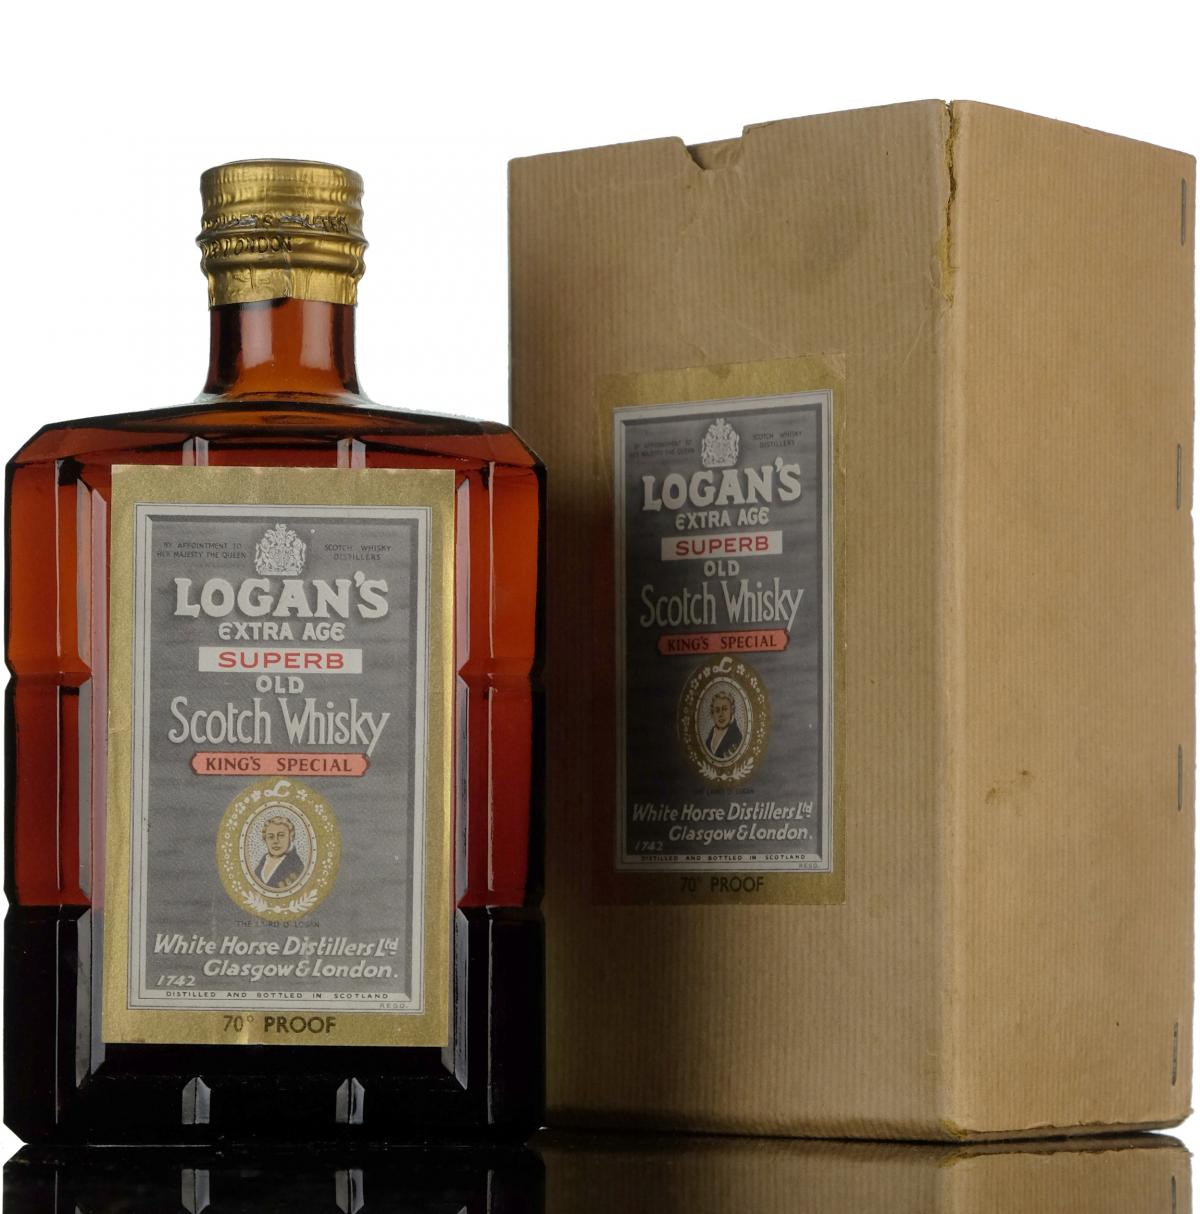 Logans Extra Age Superb - Laird O'Logan Kings Special - 1950s